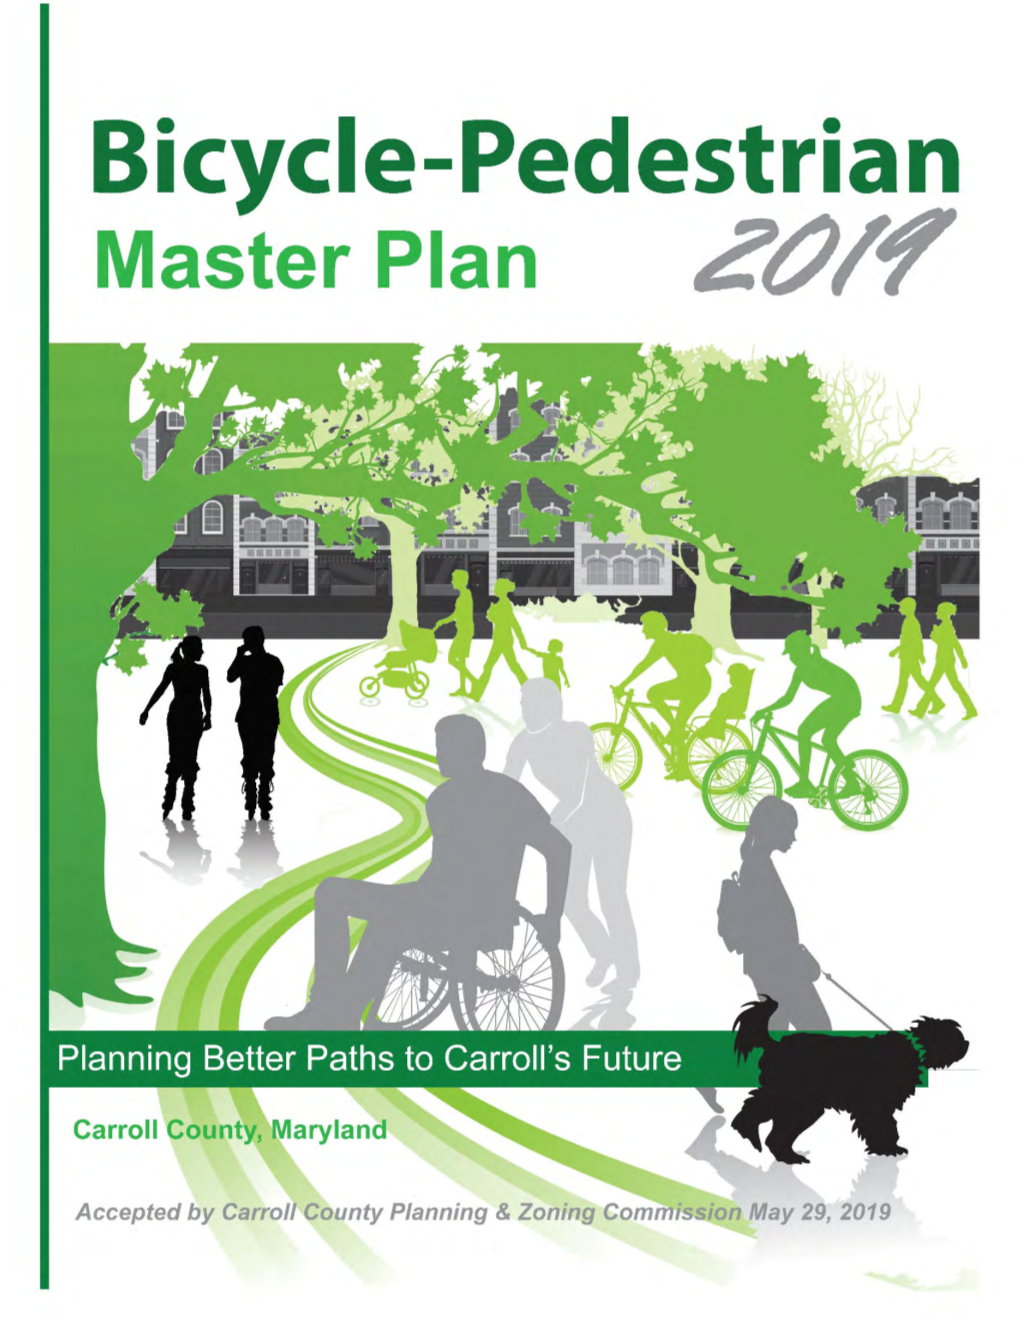 Carroll County Bicycle-Pedestrian Master Plan Are Available…